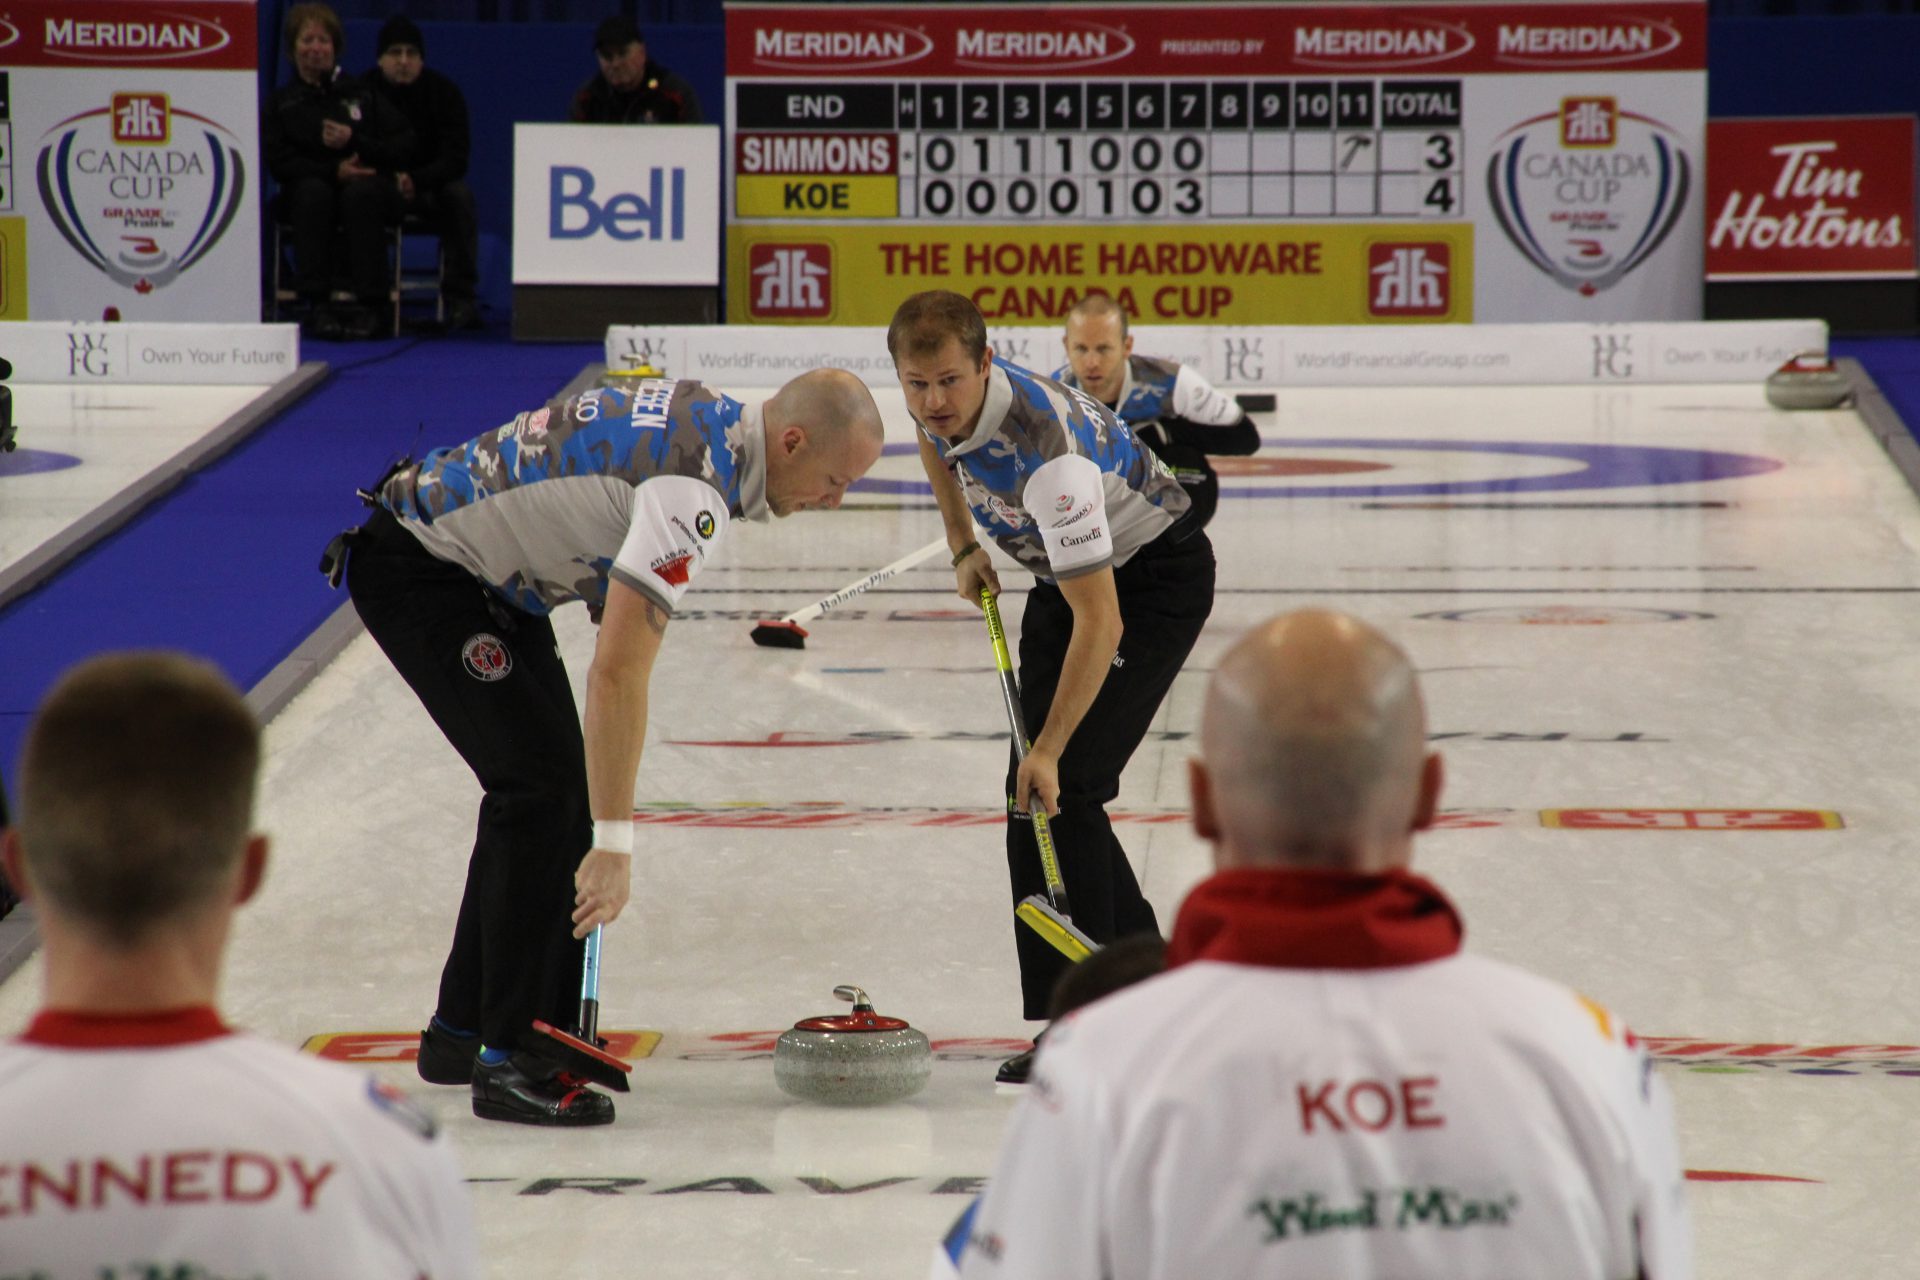 Carter Rycroft unsure of curling future after Team Simmons